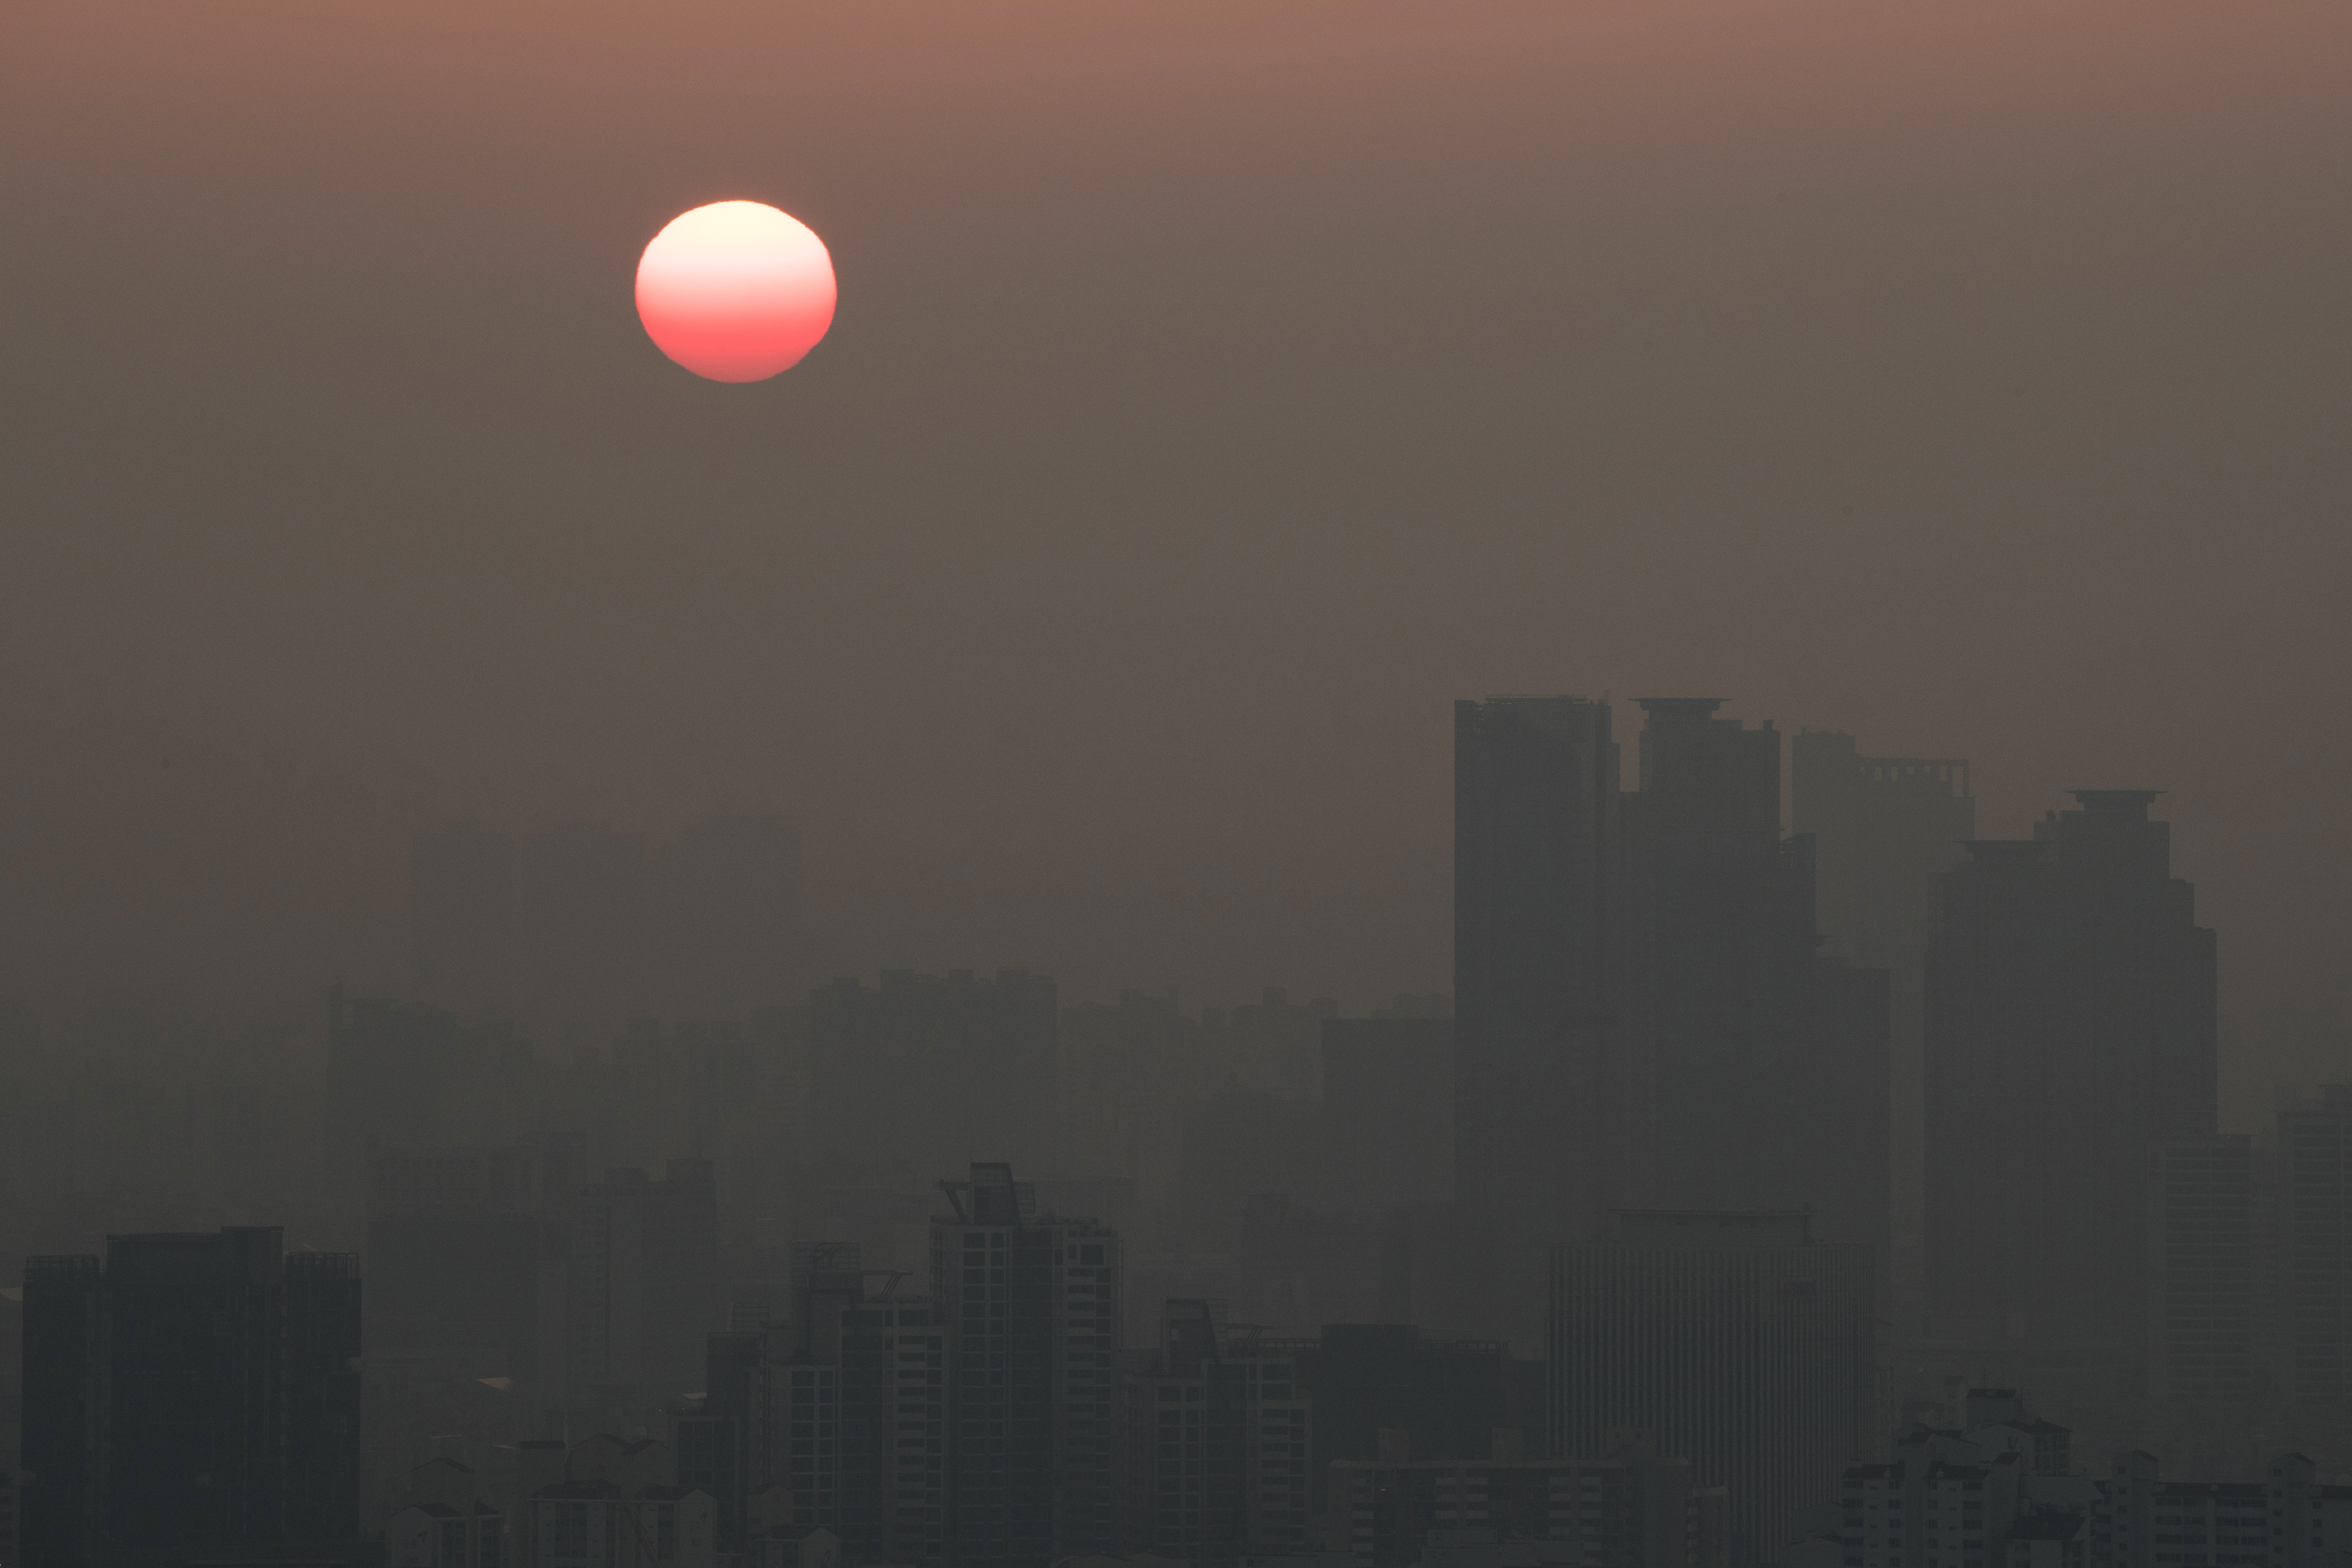 The sun rises over residential and commercial buildings in Seoul, South Korea, on Monday, March 13, 2017. (SeongJoon Cho/Bloomberg via Getty Images)